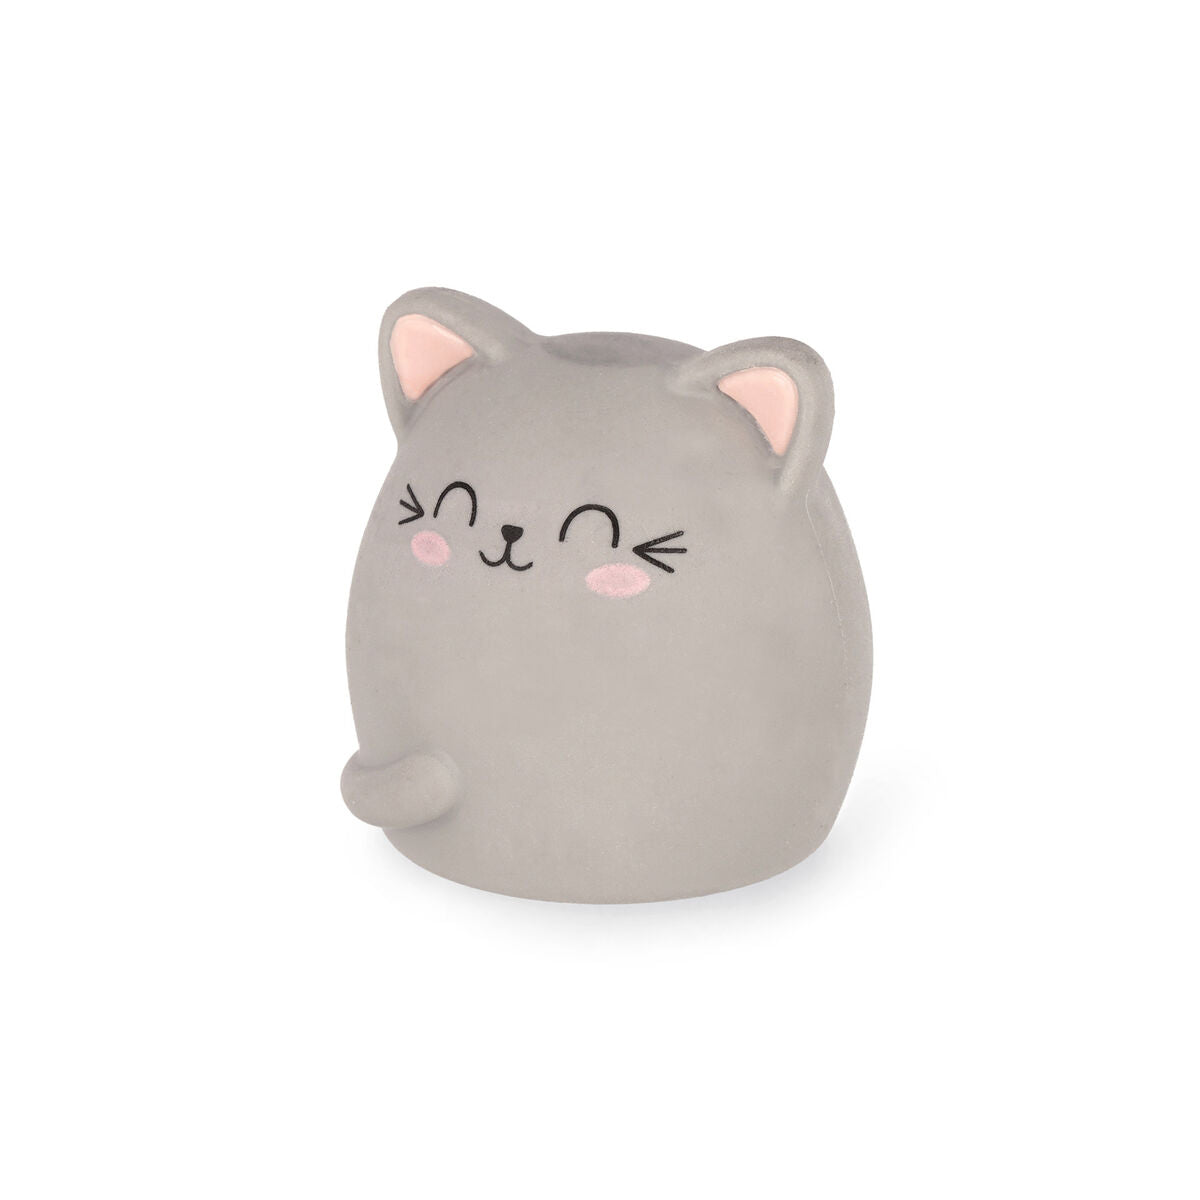 Back to School | Legami Scented Eraser Kitty by Weirs of Baggot Street